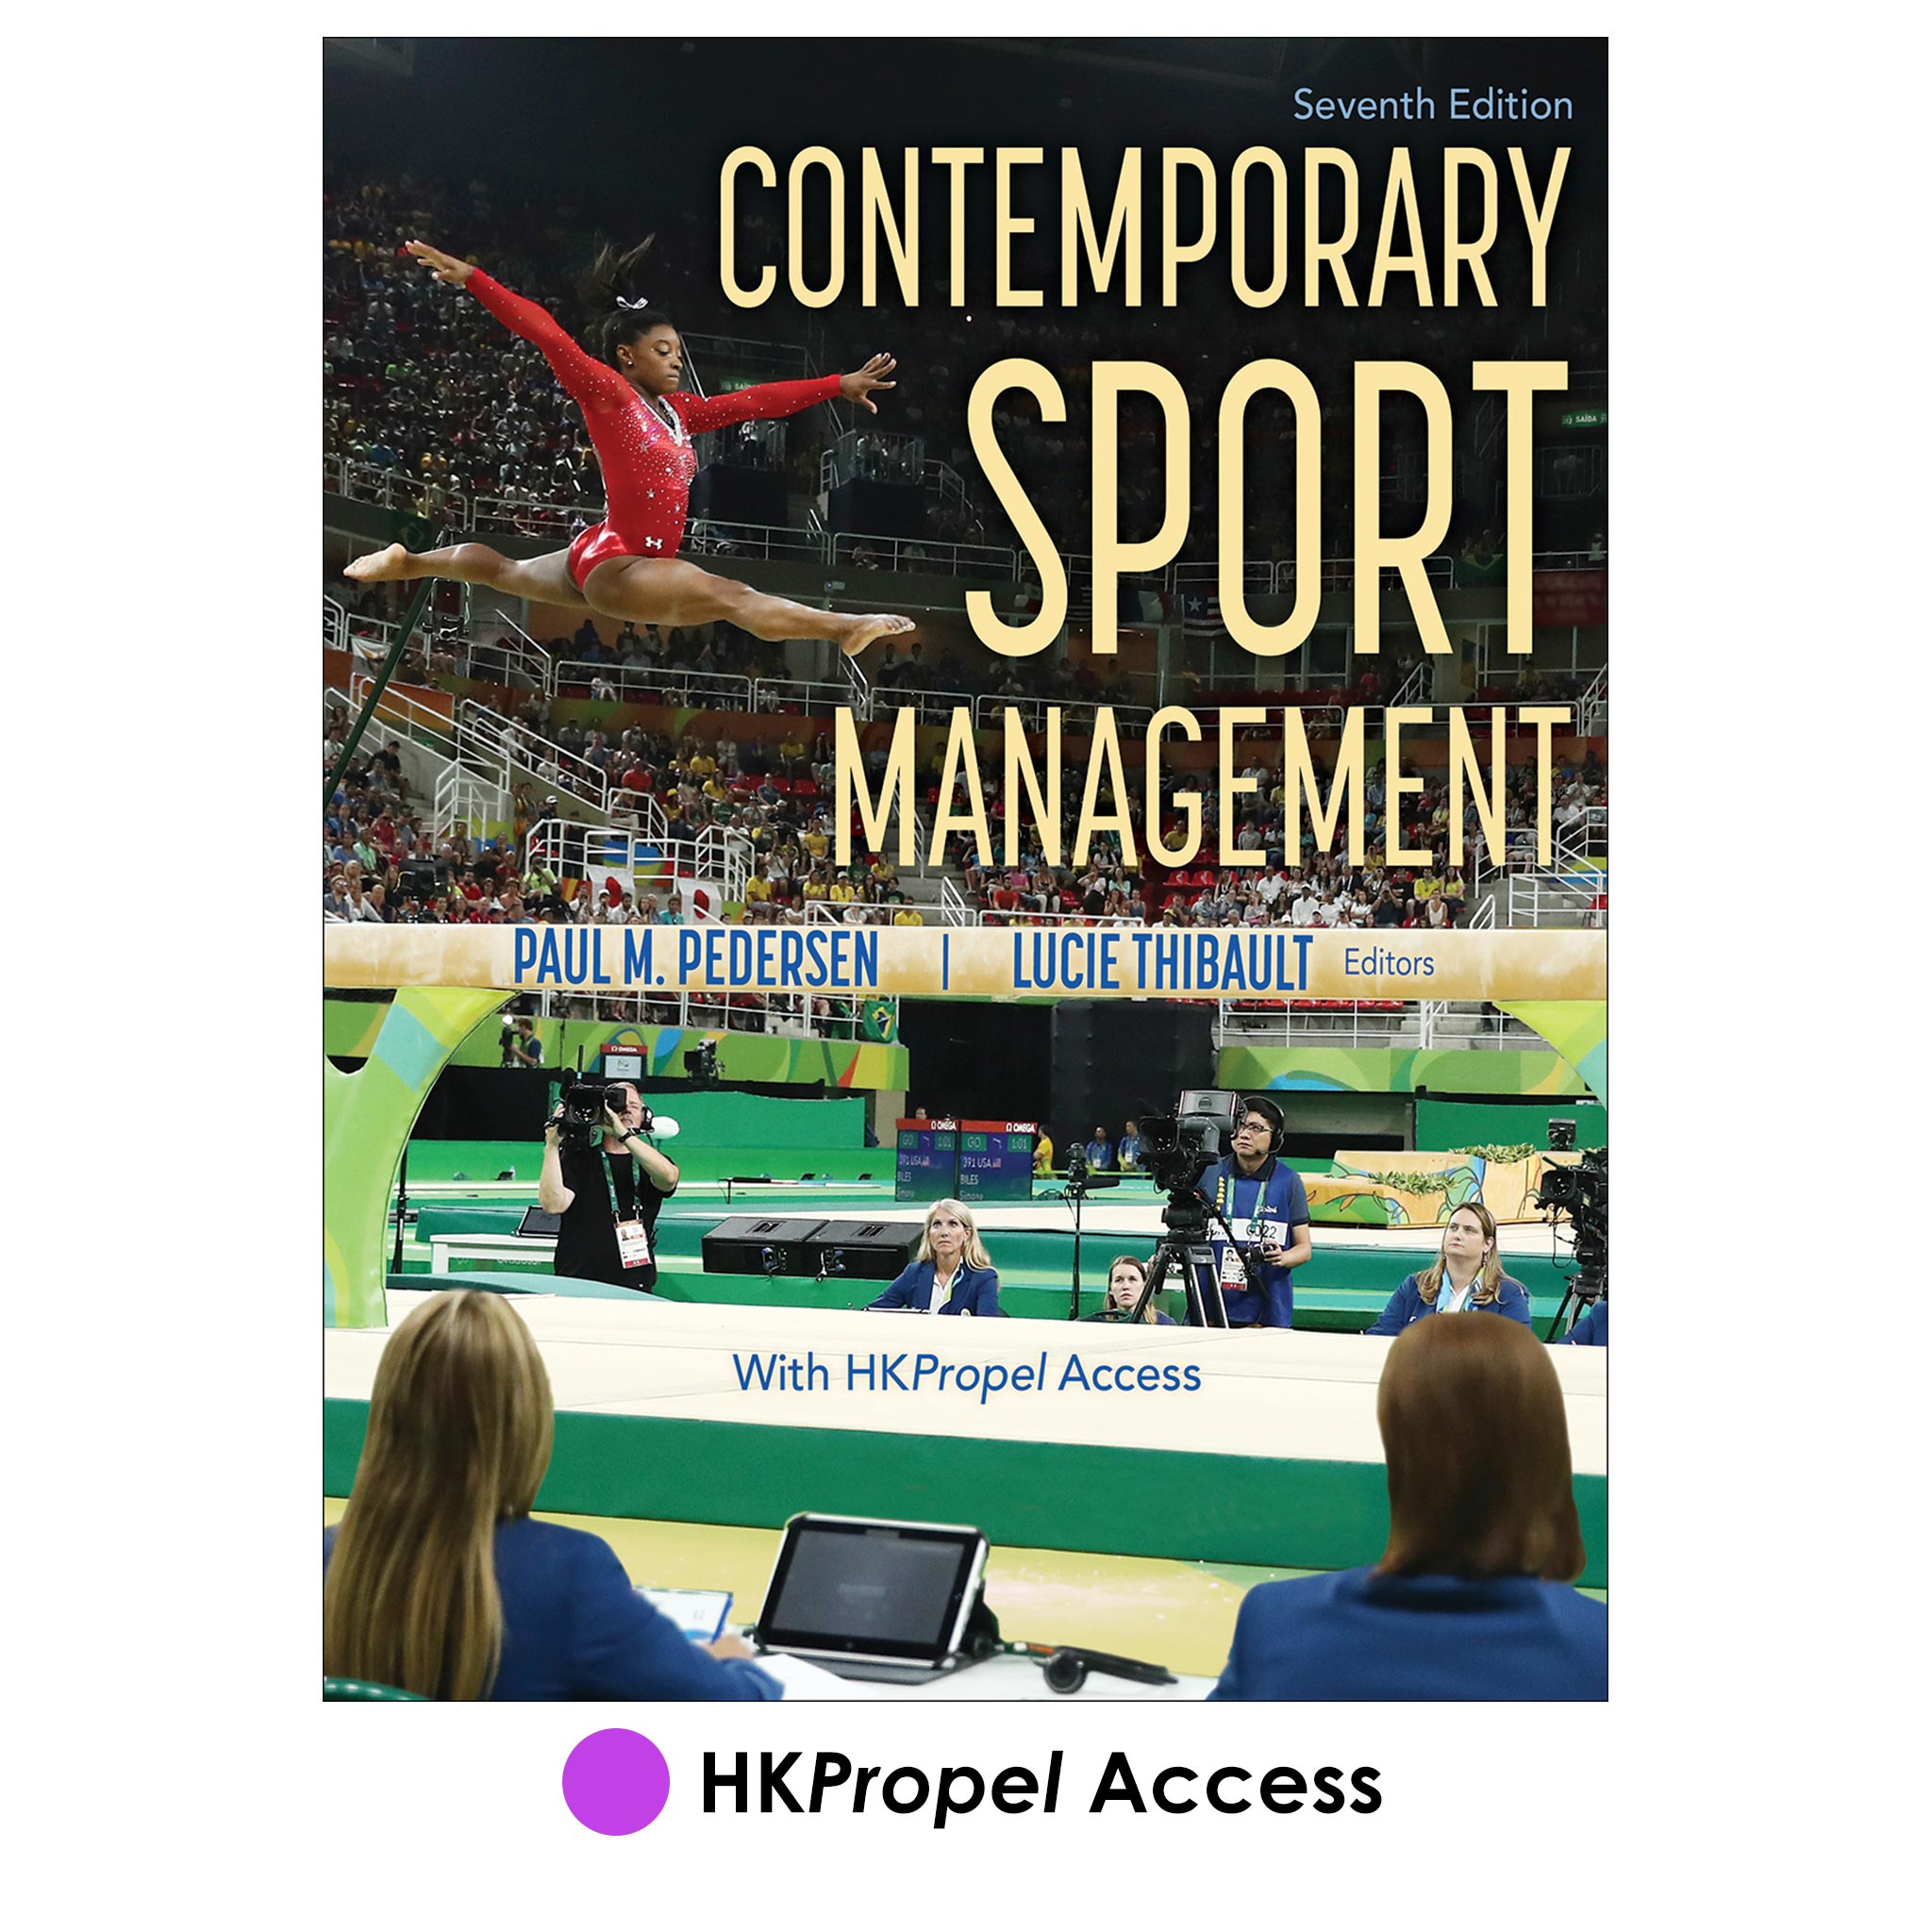 Contemporary Sport Management 7th Edition With HKPropel Access